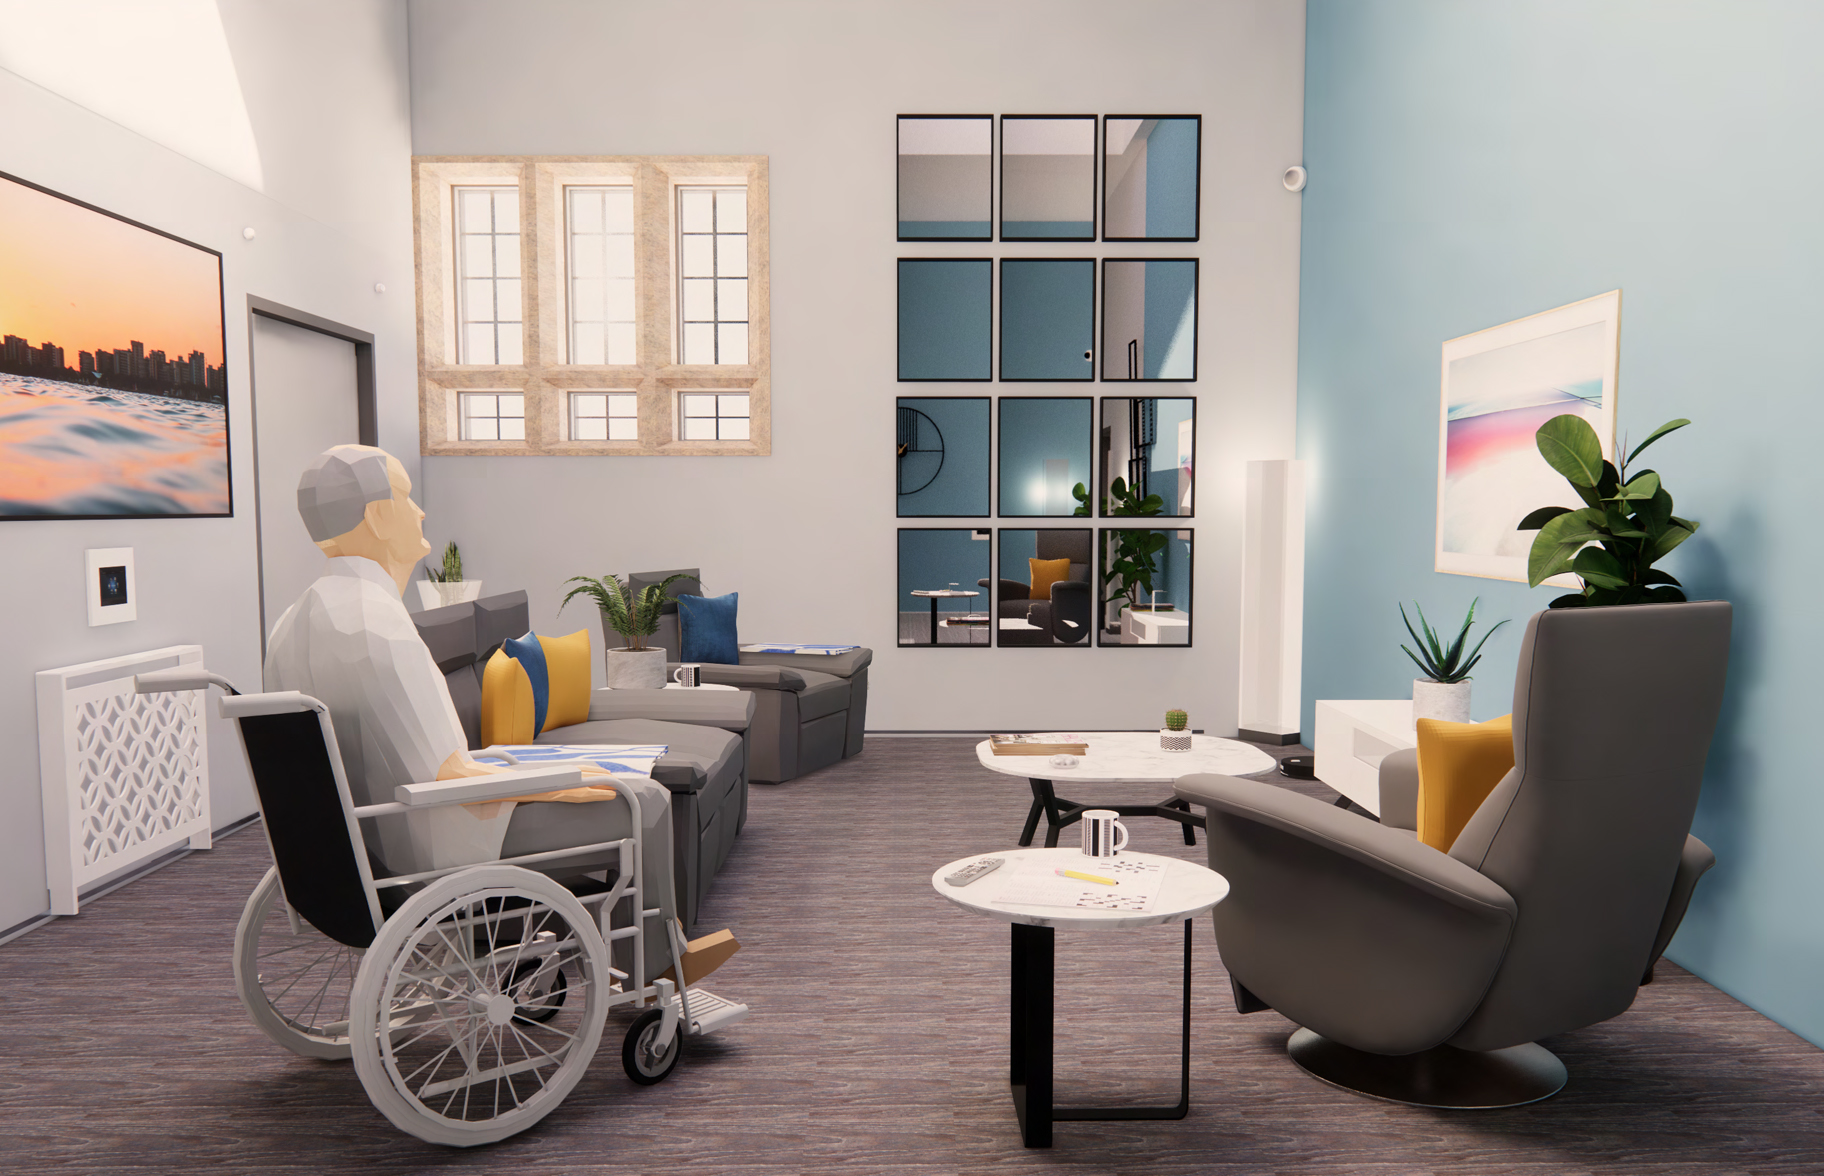 BA Interior Design work by Emma Thornton showing SMILE Apartment Lounge View